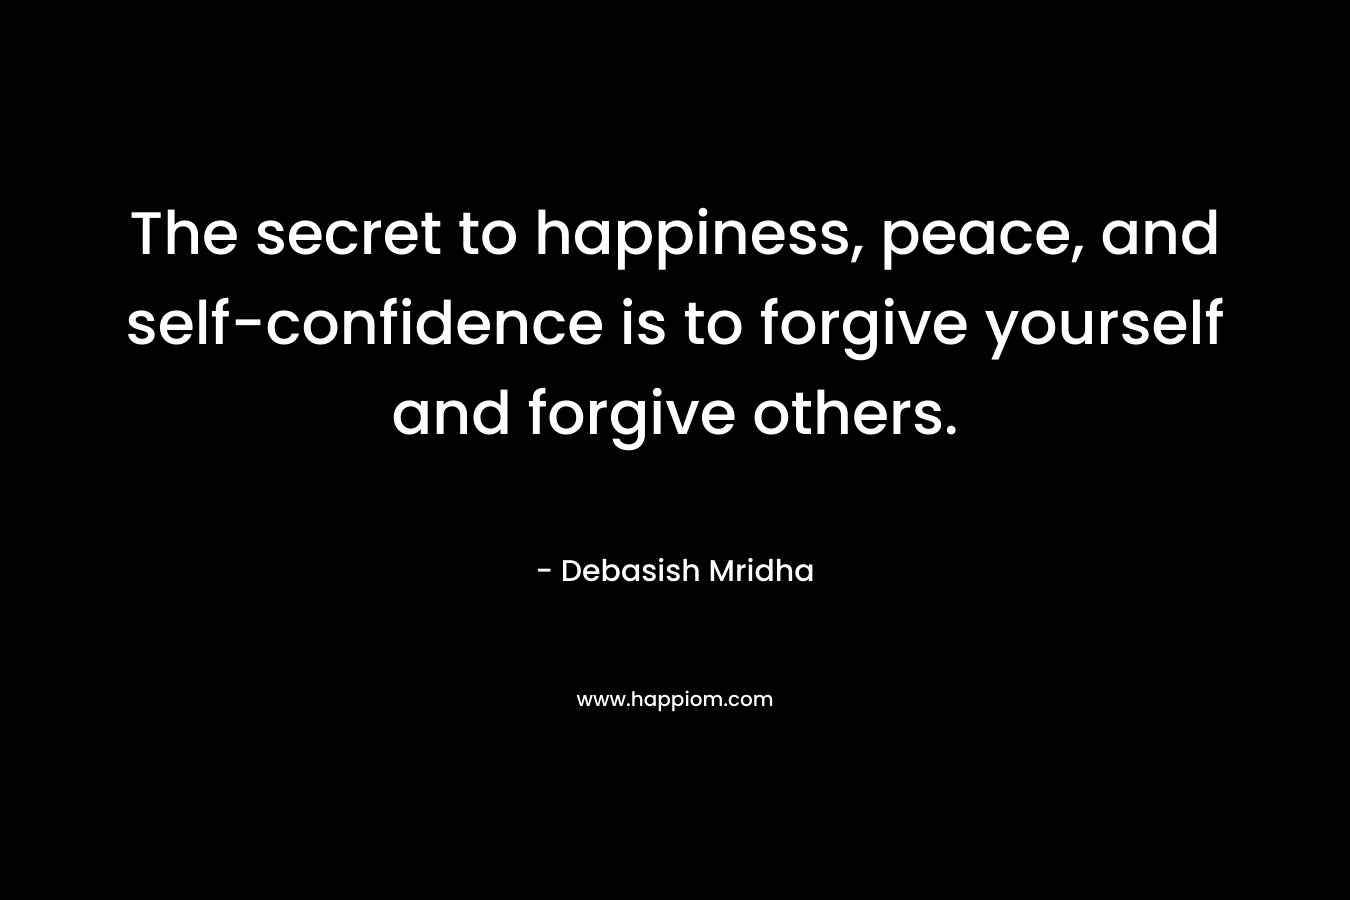 The secret to happiness, peace, and self-confidence is to forgive yourself and forgive others.